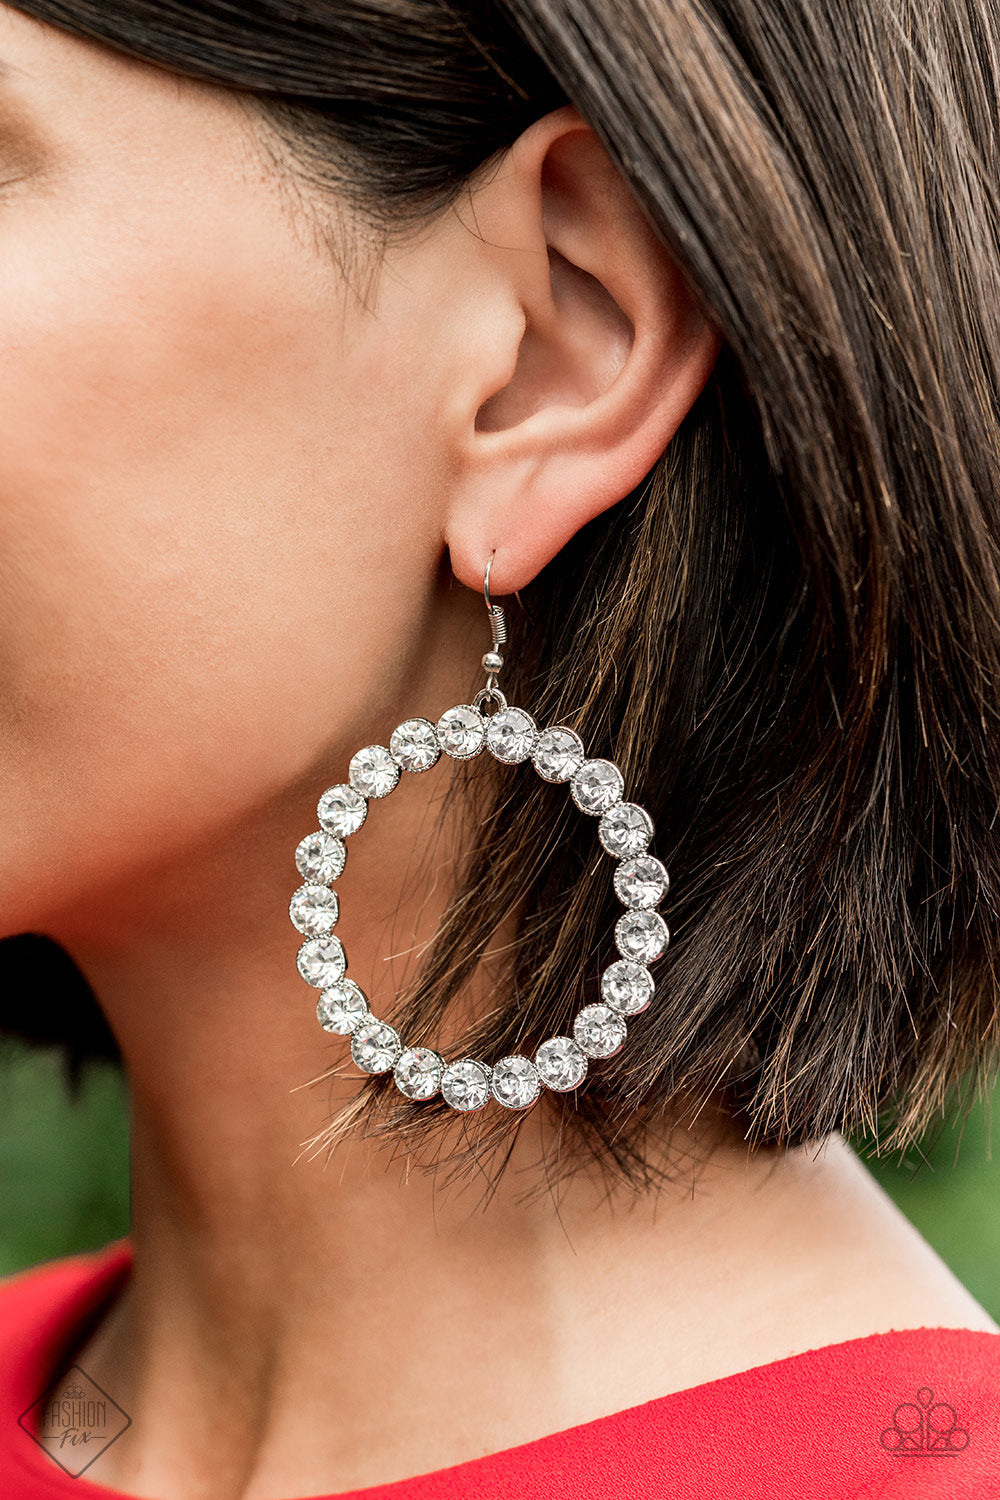 Welcome to the GLAM-boree White Rhinestone Earring - Paparazzi Accessories Featuring sleek silver fittings, oversized white rhinestones spin into a glittery hoop with a blinding finish. Earring attaches to a standard fishhook fitting.  Sold as one pair of earrings.